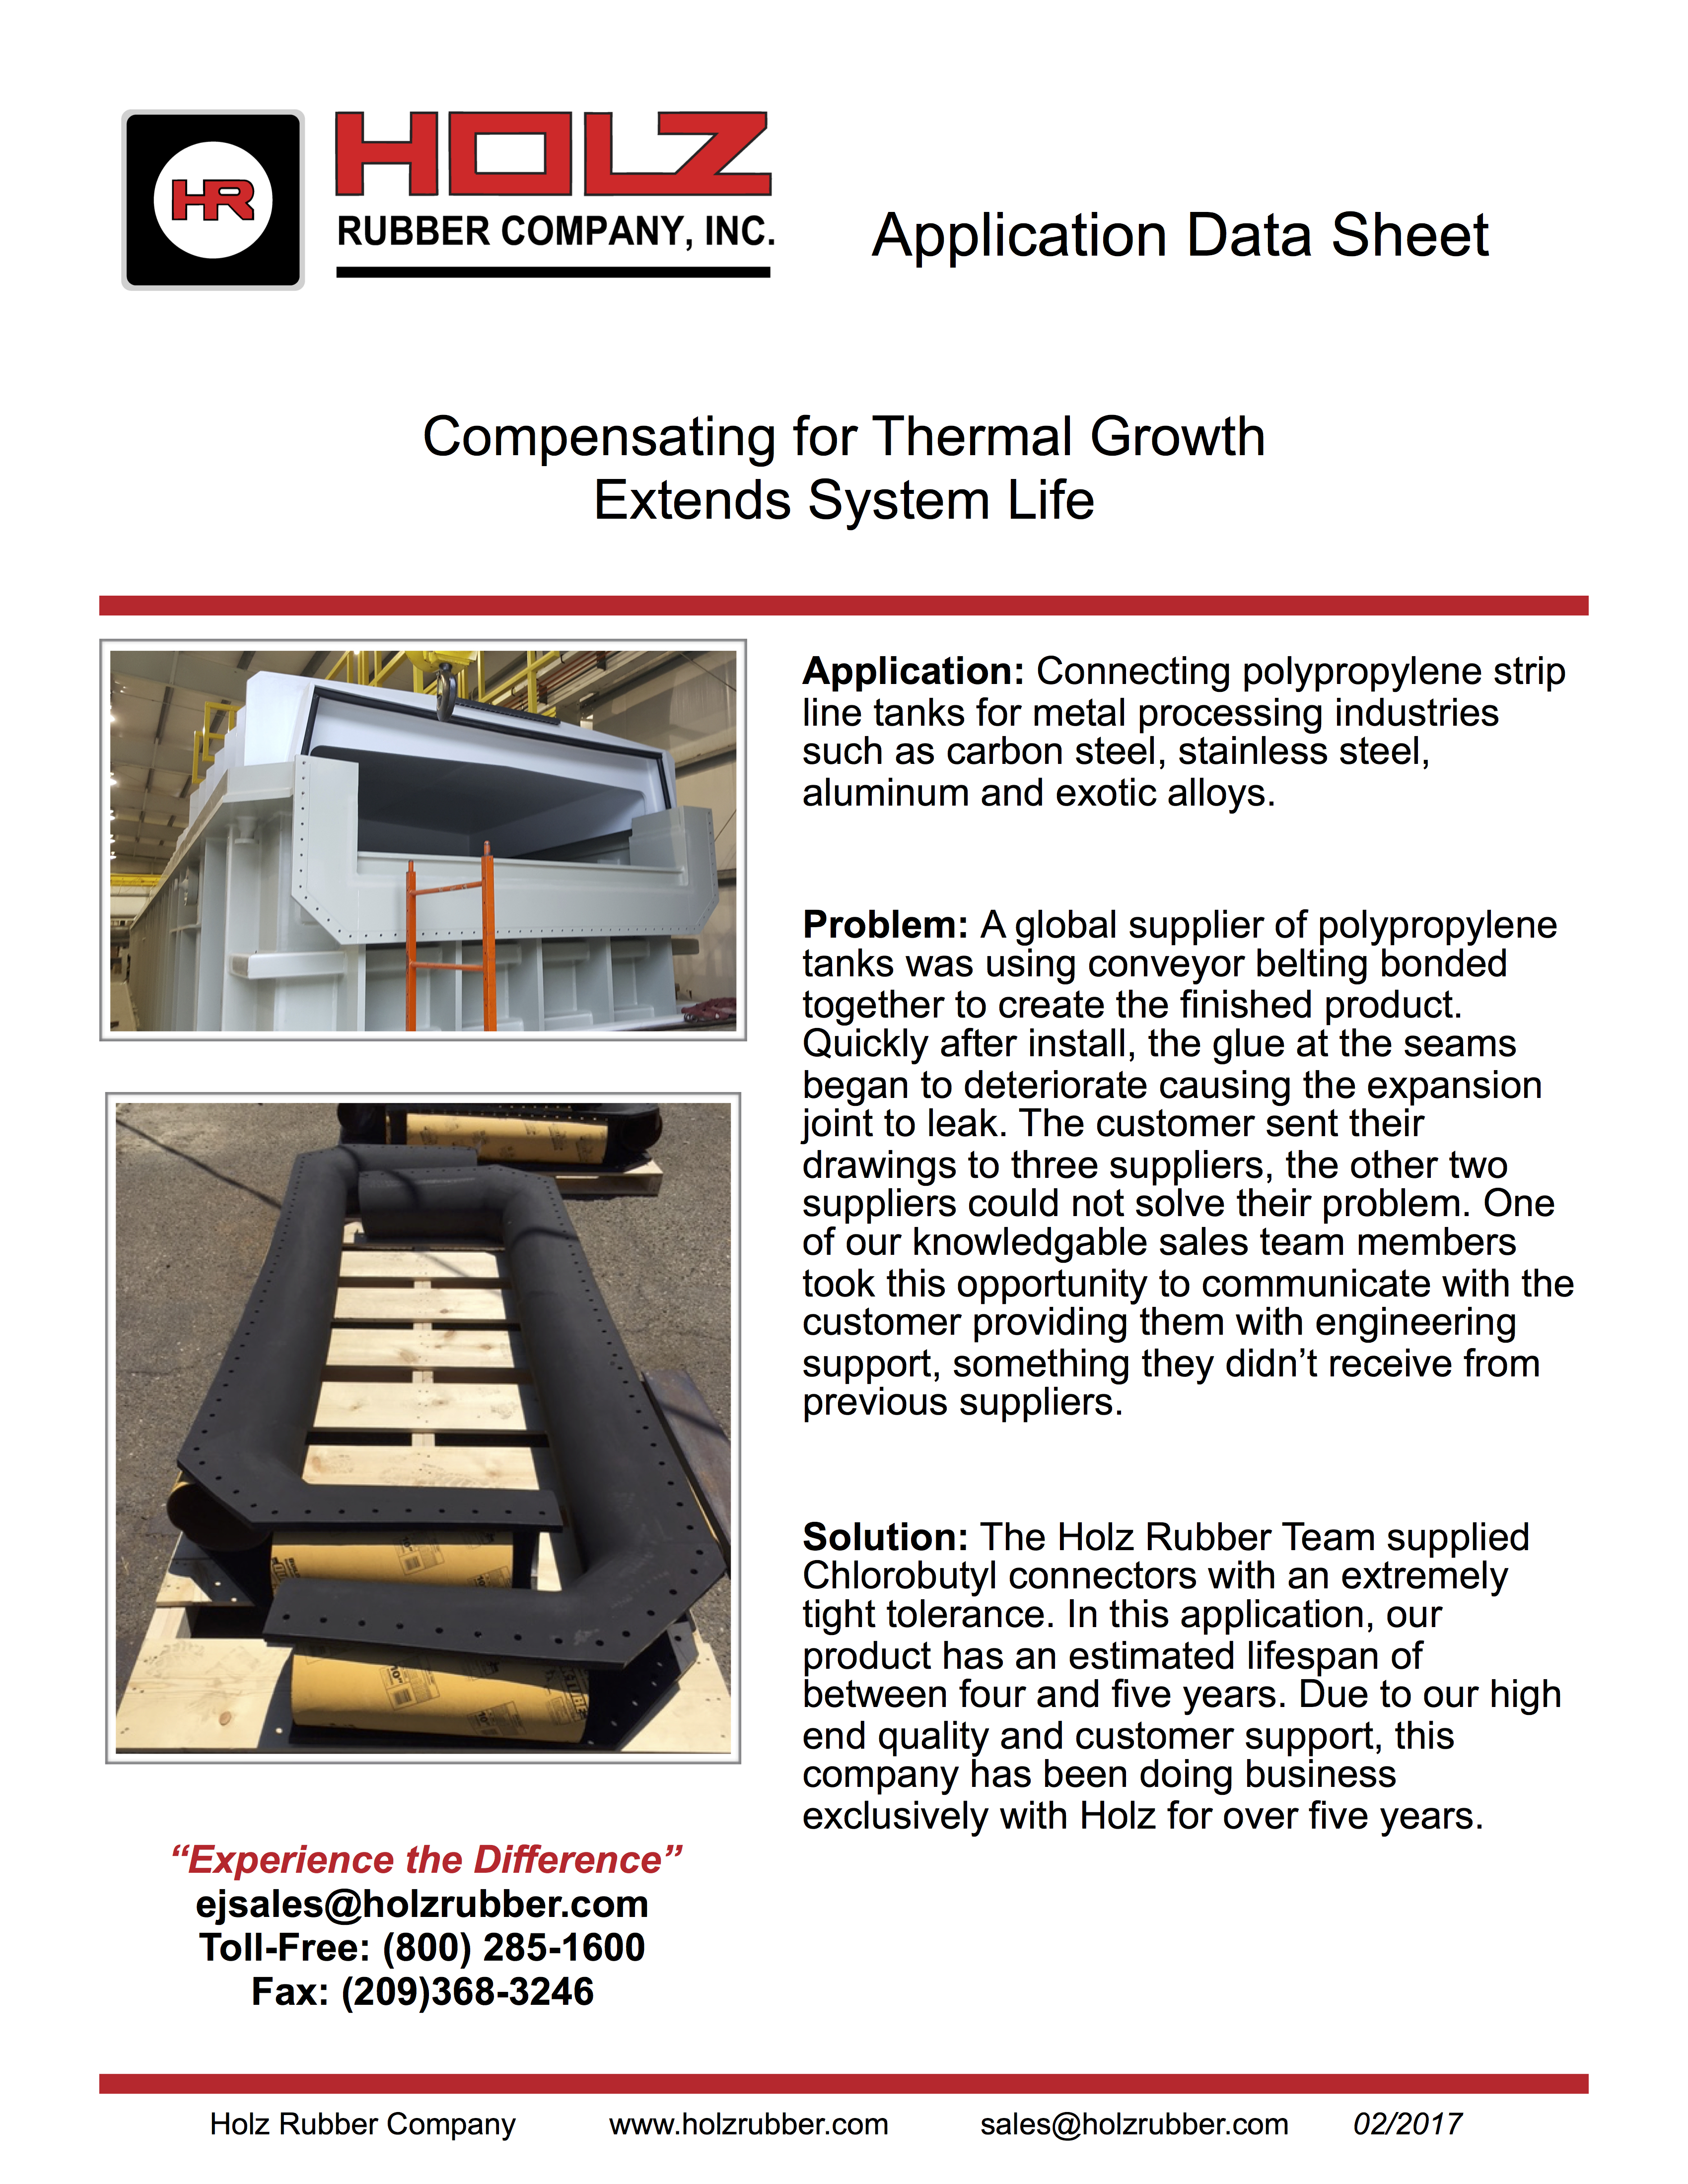 Compensating for Thermal Growth Extends System Life